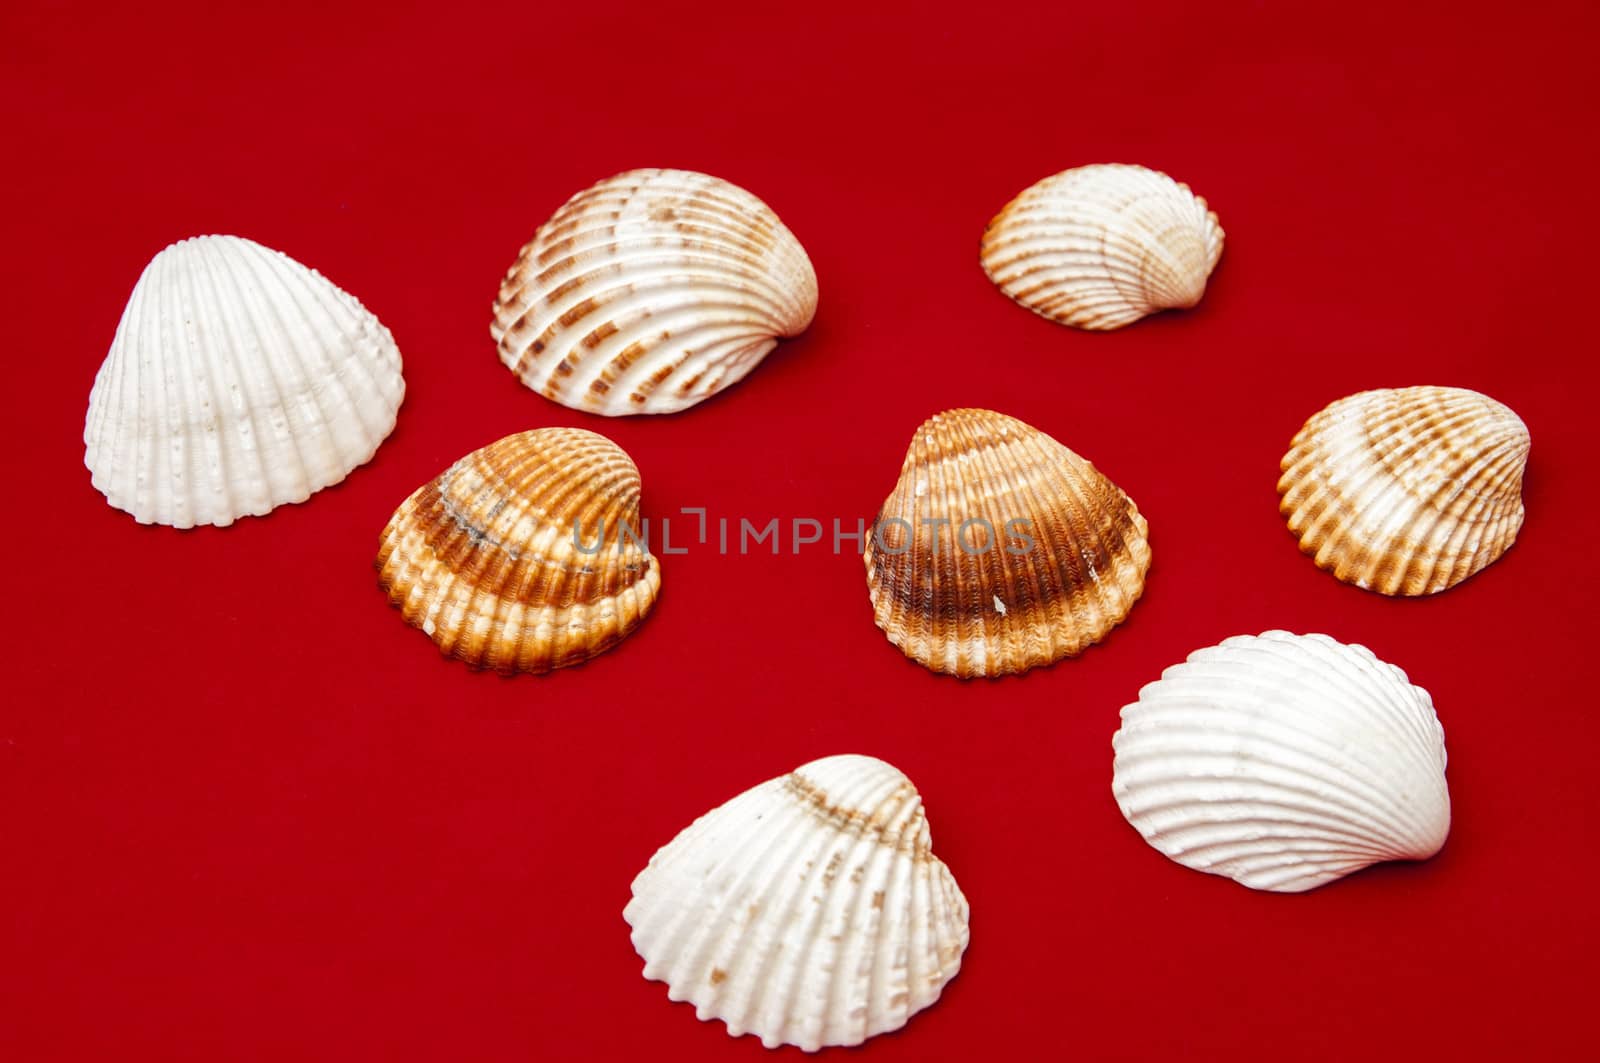 seashells on a red background